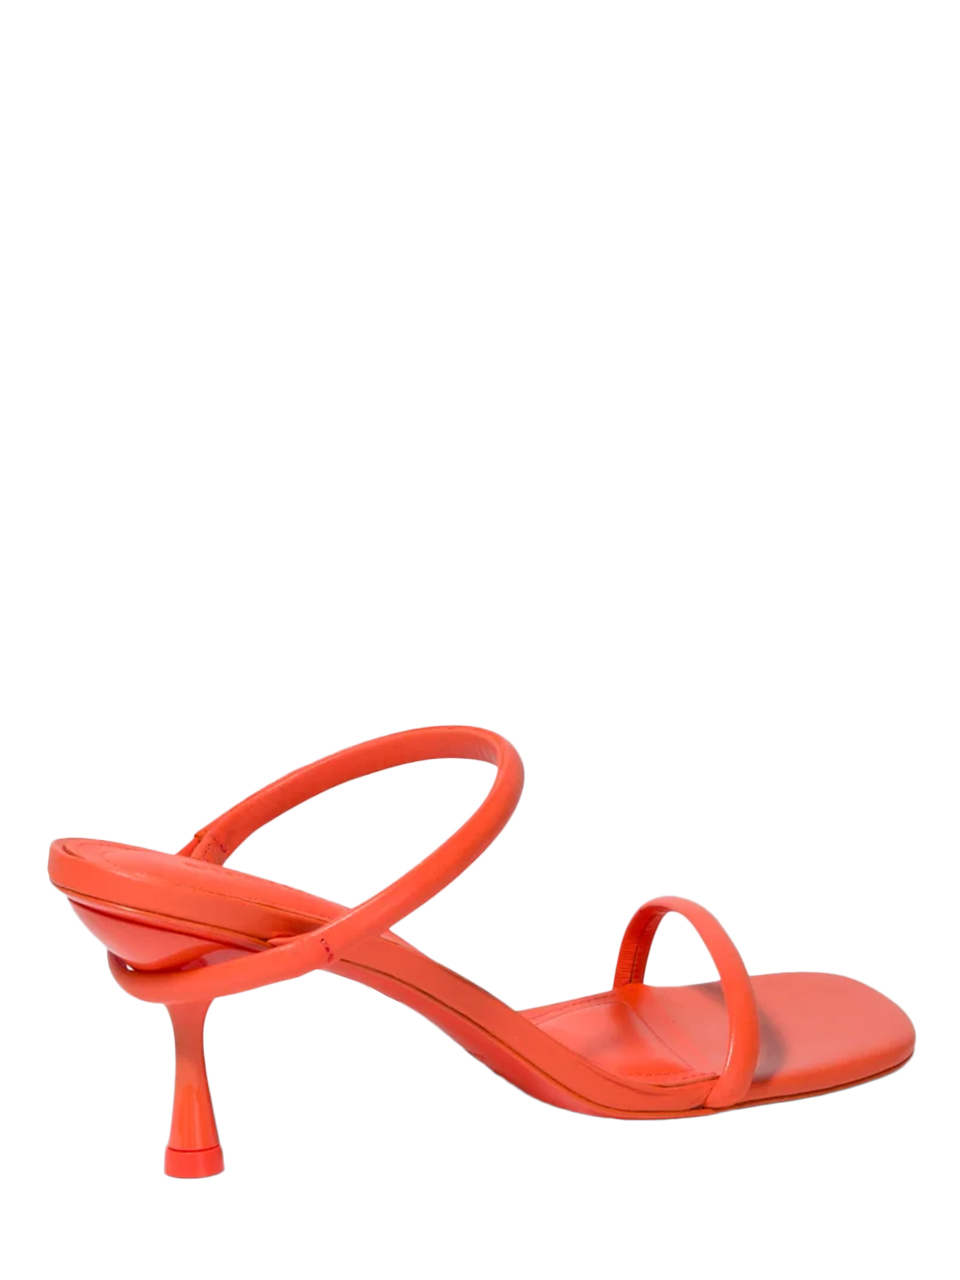 SIMKHAI Siren Low Leather Sandal in Flame Back Side View 